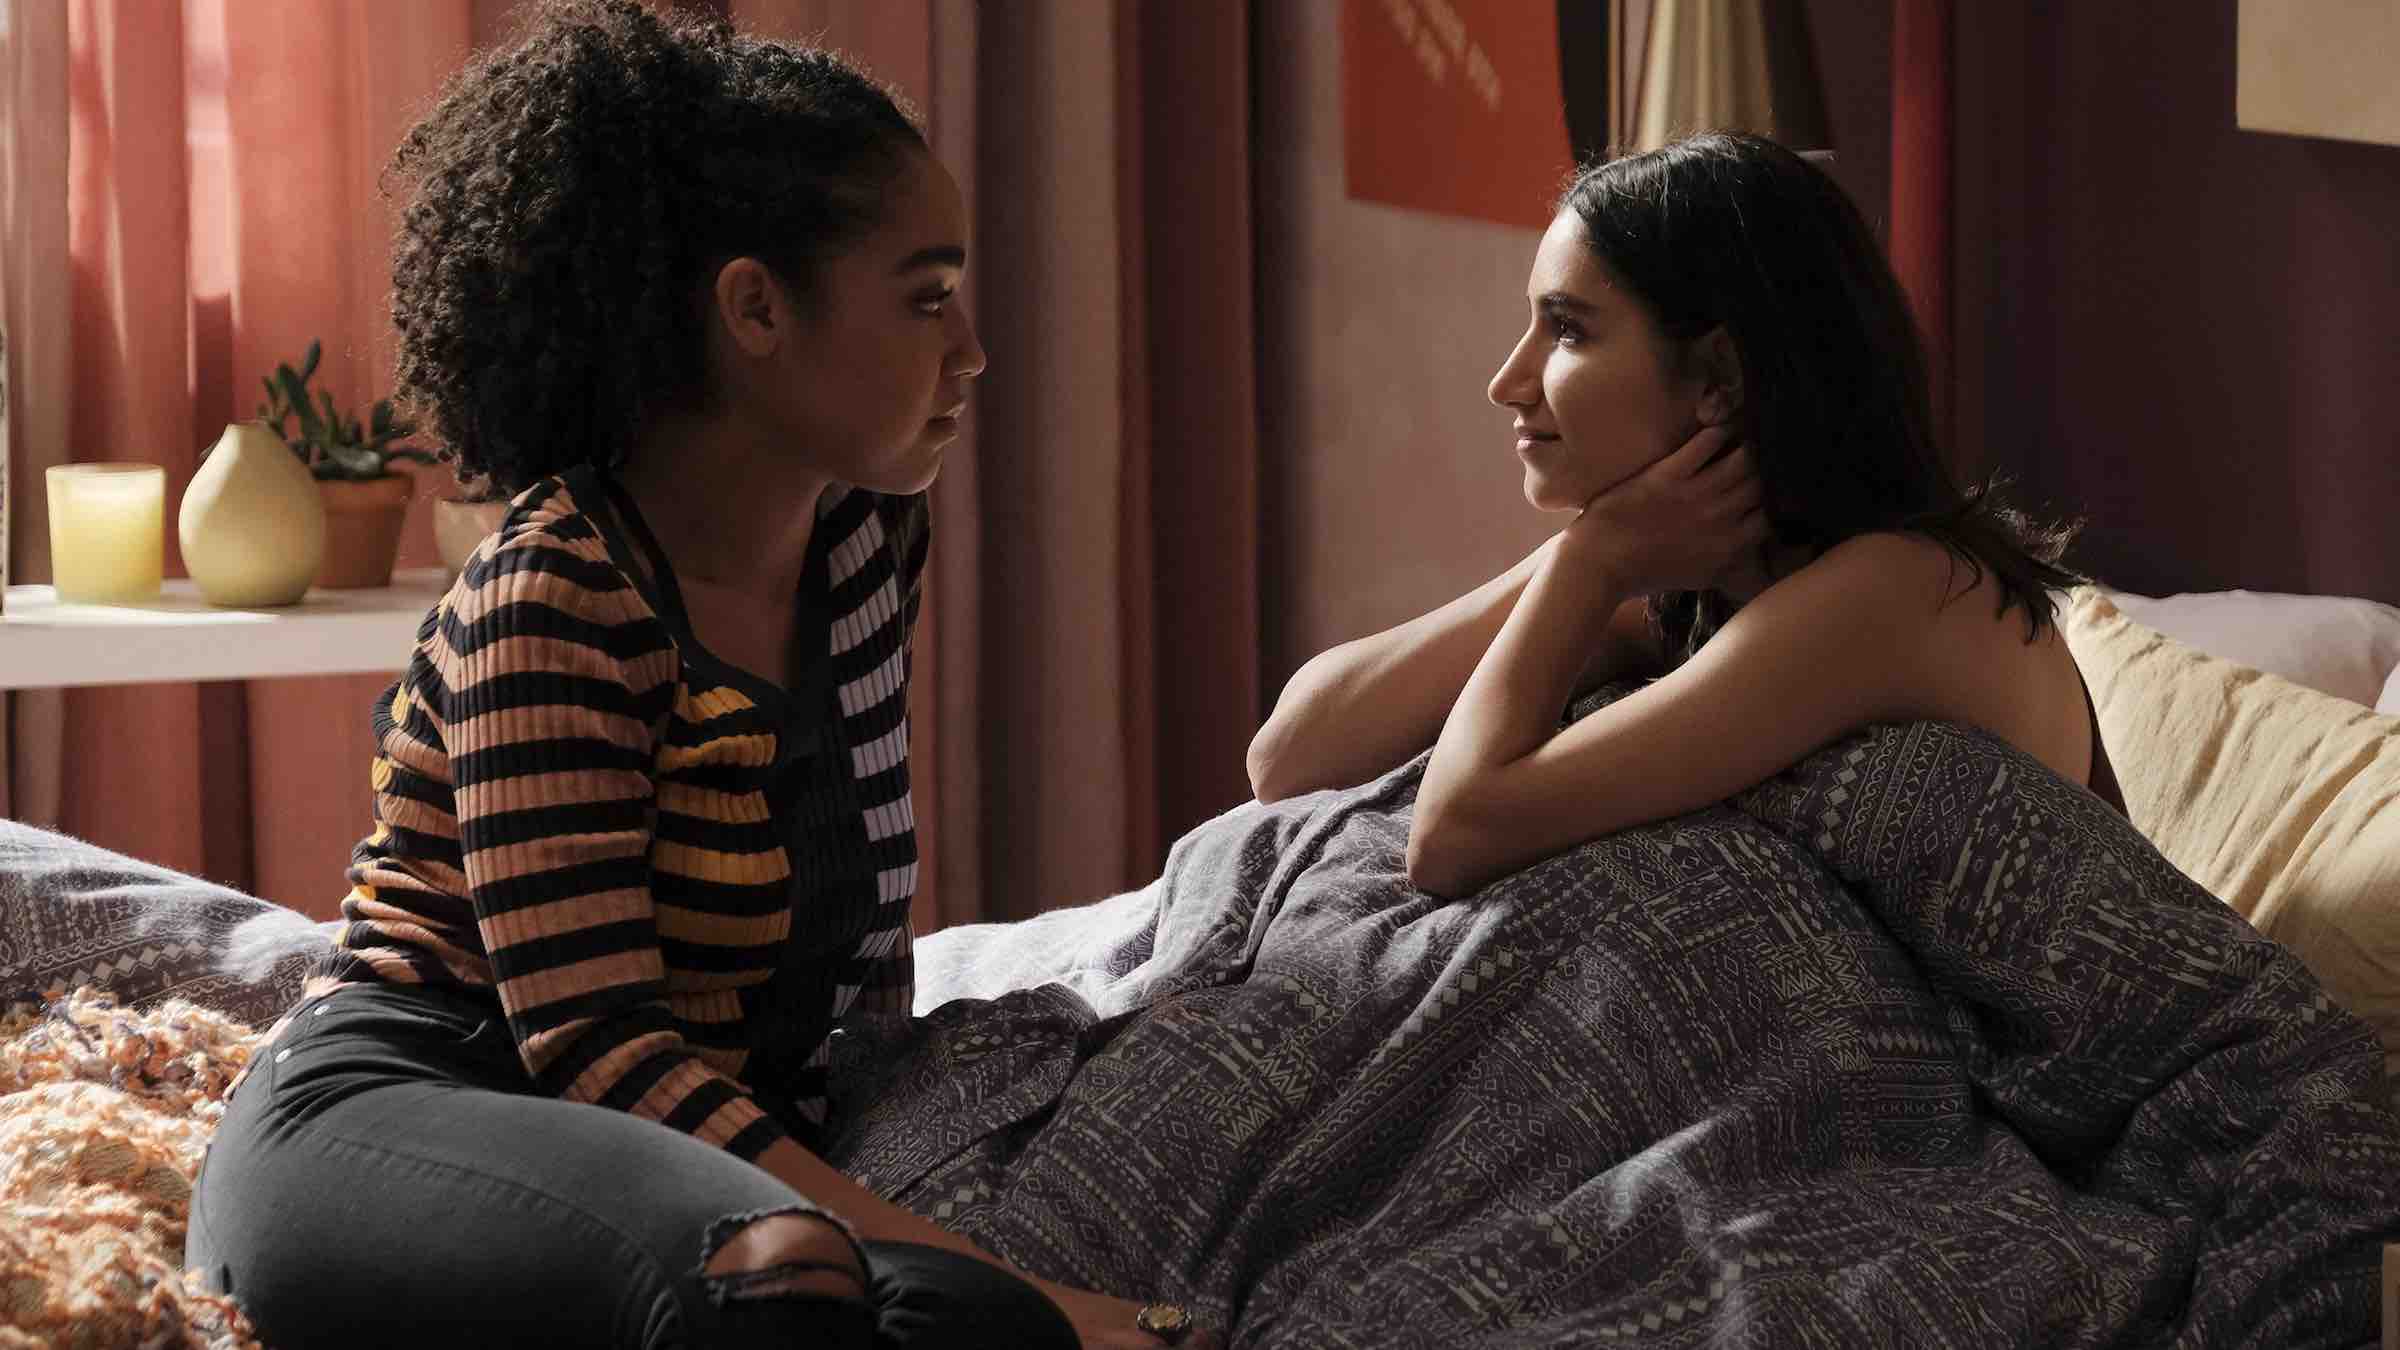 The 2010s provided more diversity than ever. Here are the shows that explore the relationships between lesbian couples.